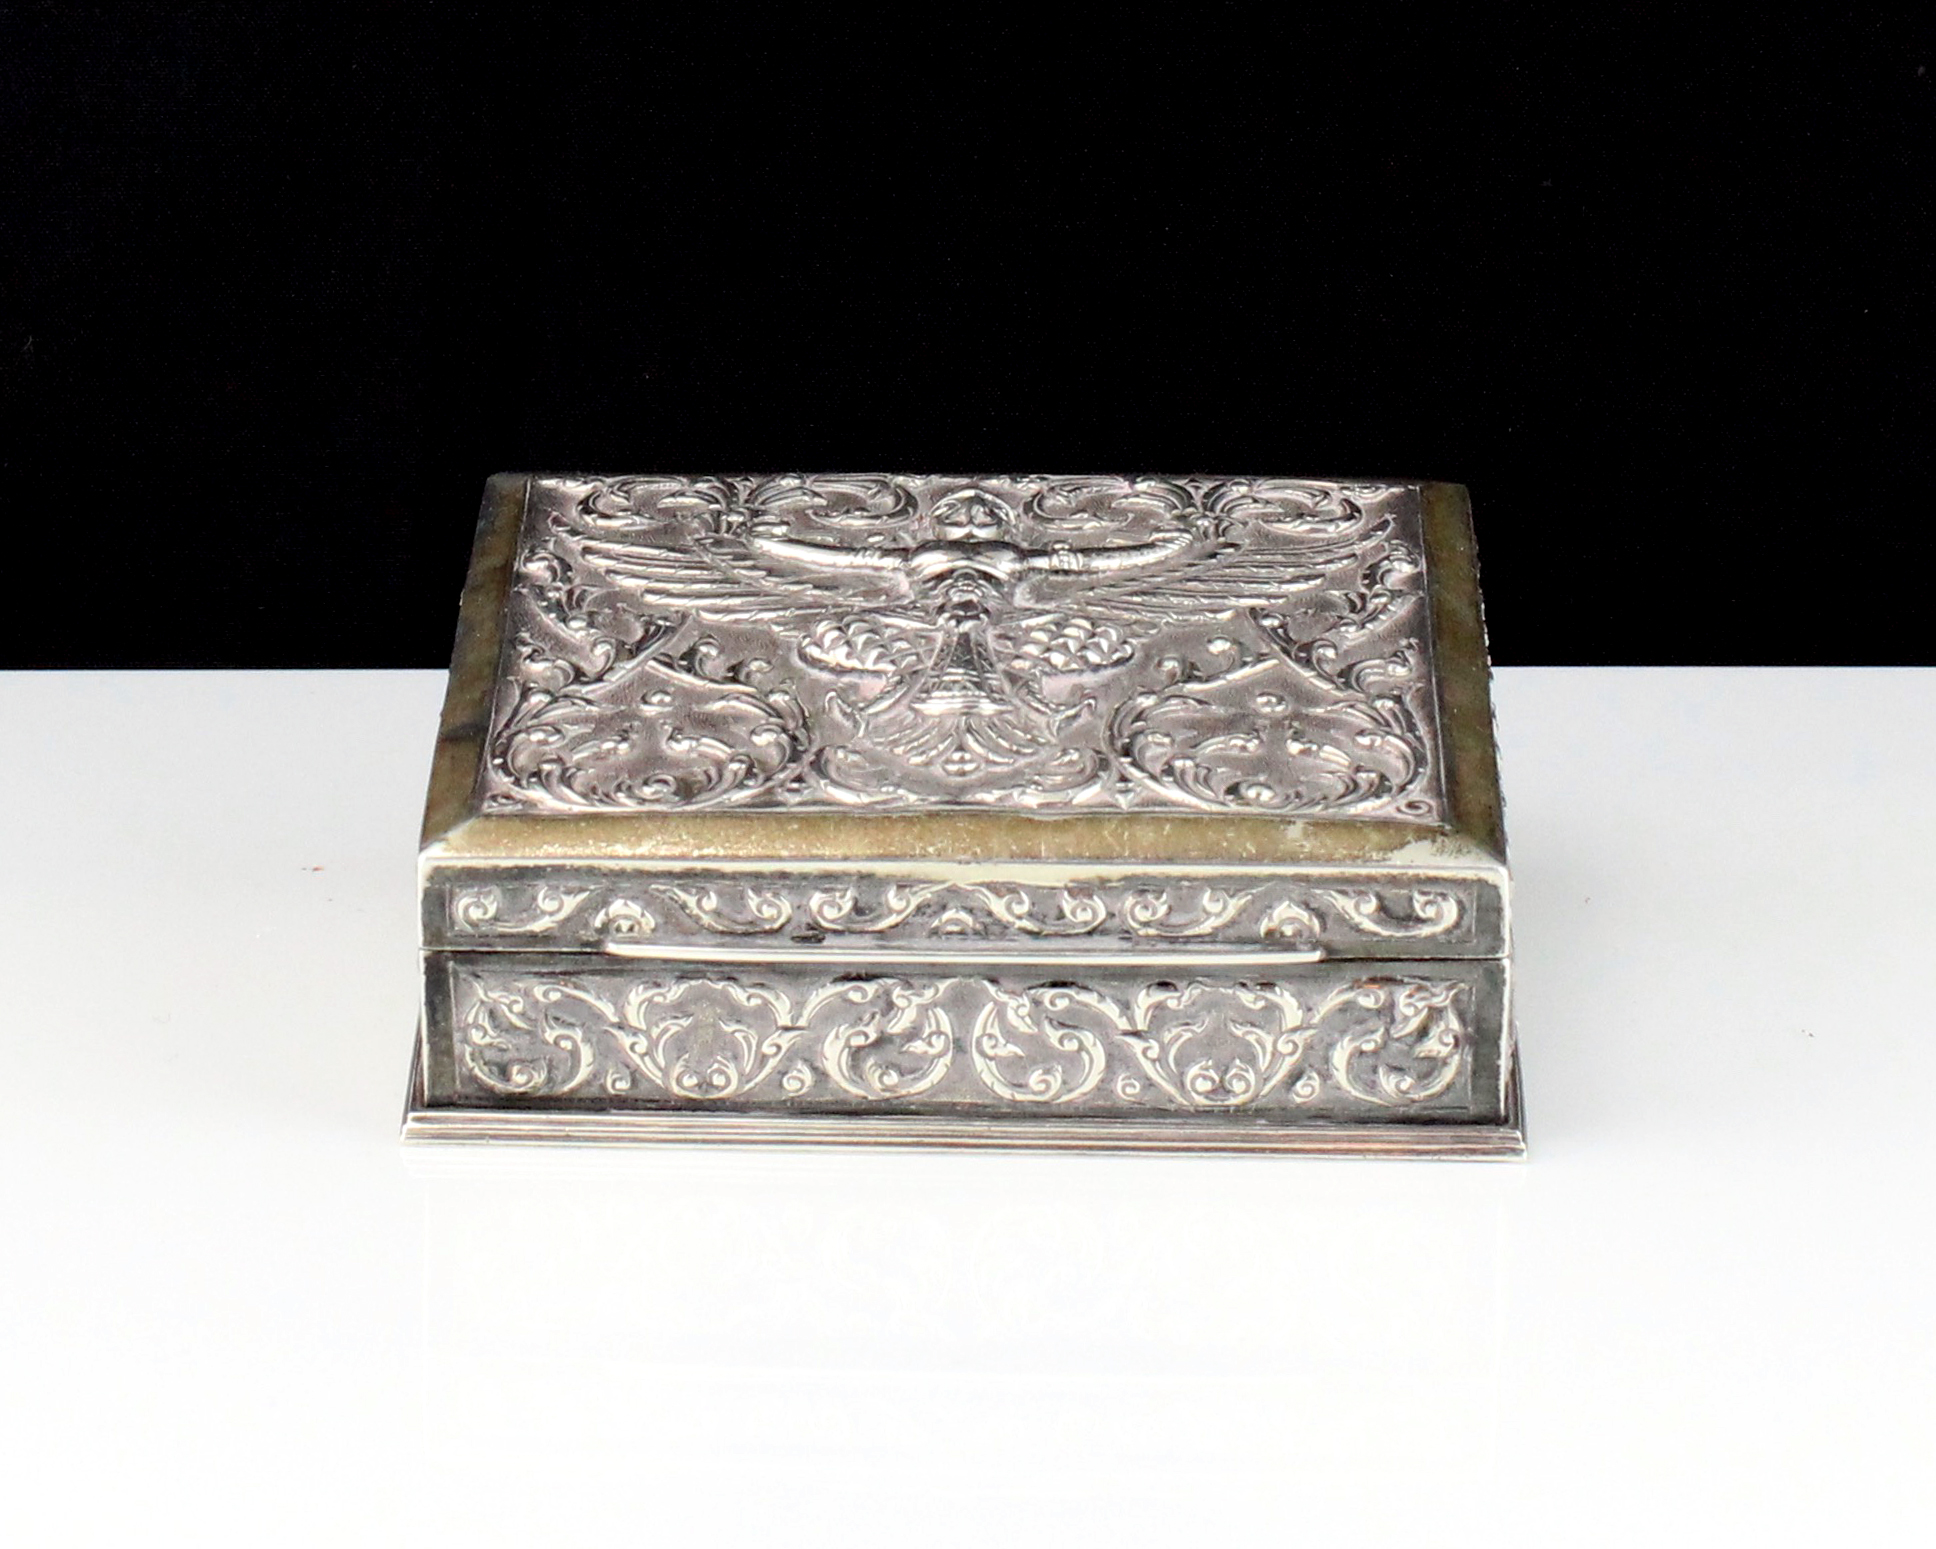 A mid 20th Century Siamese / Thai Sterling Silver cigar box of rectangular form with high relief